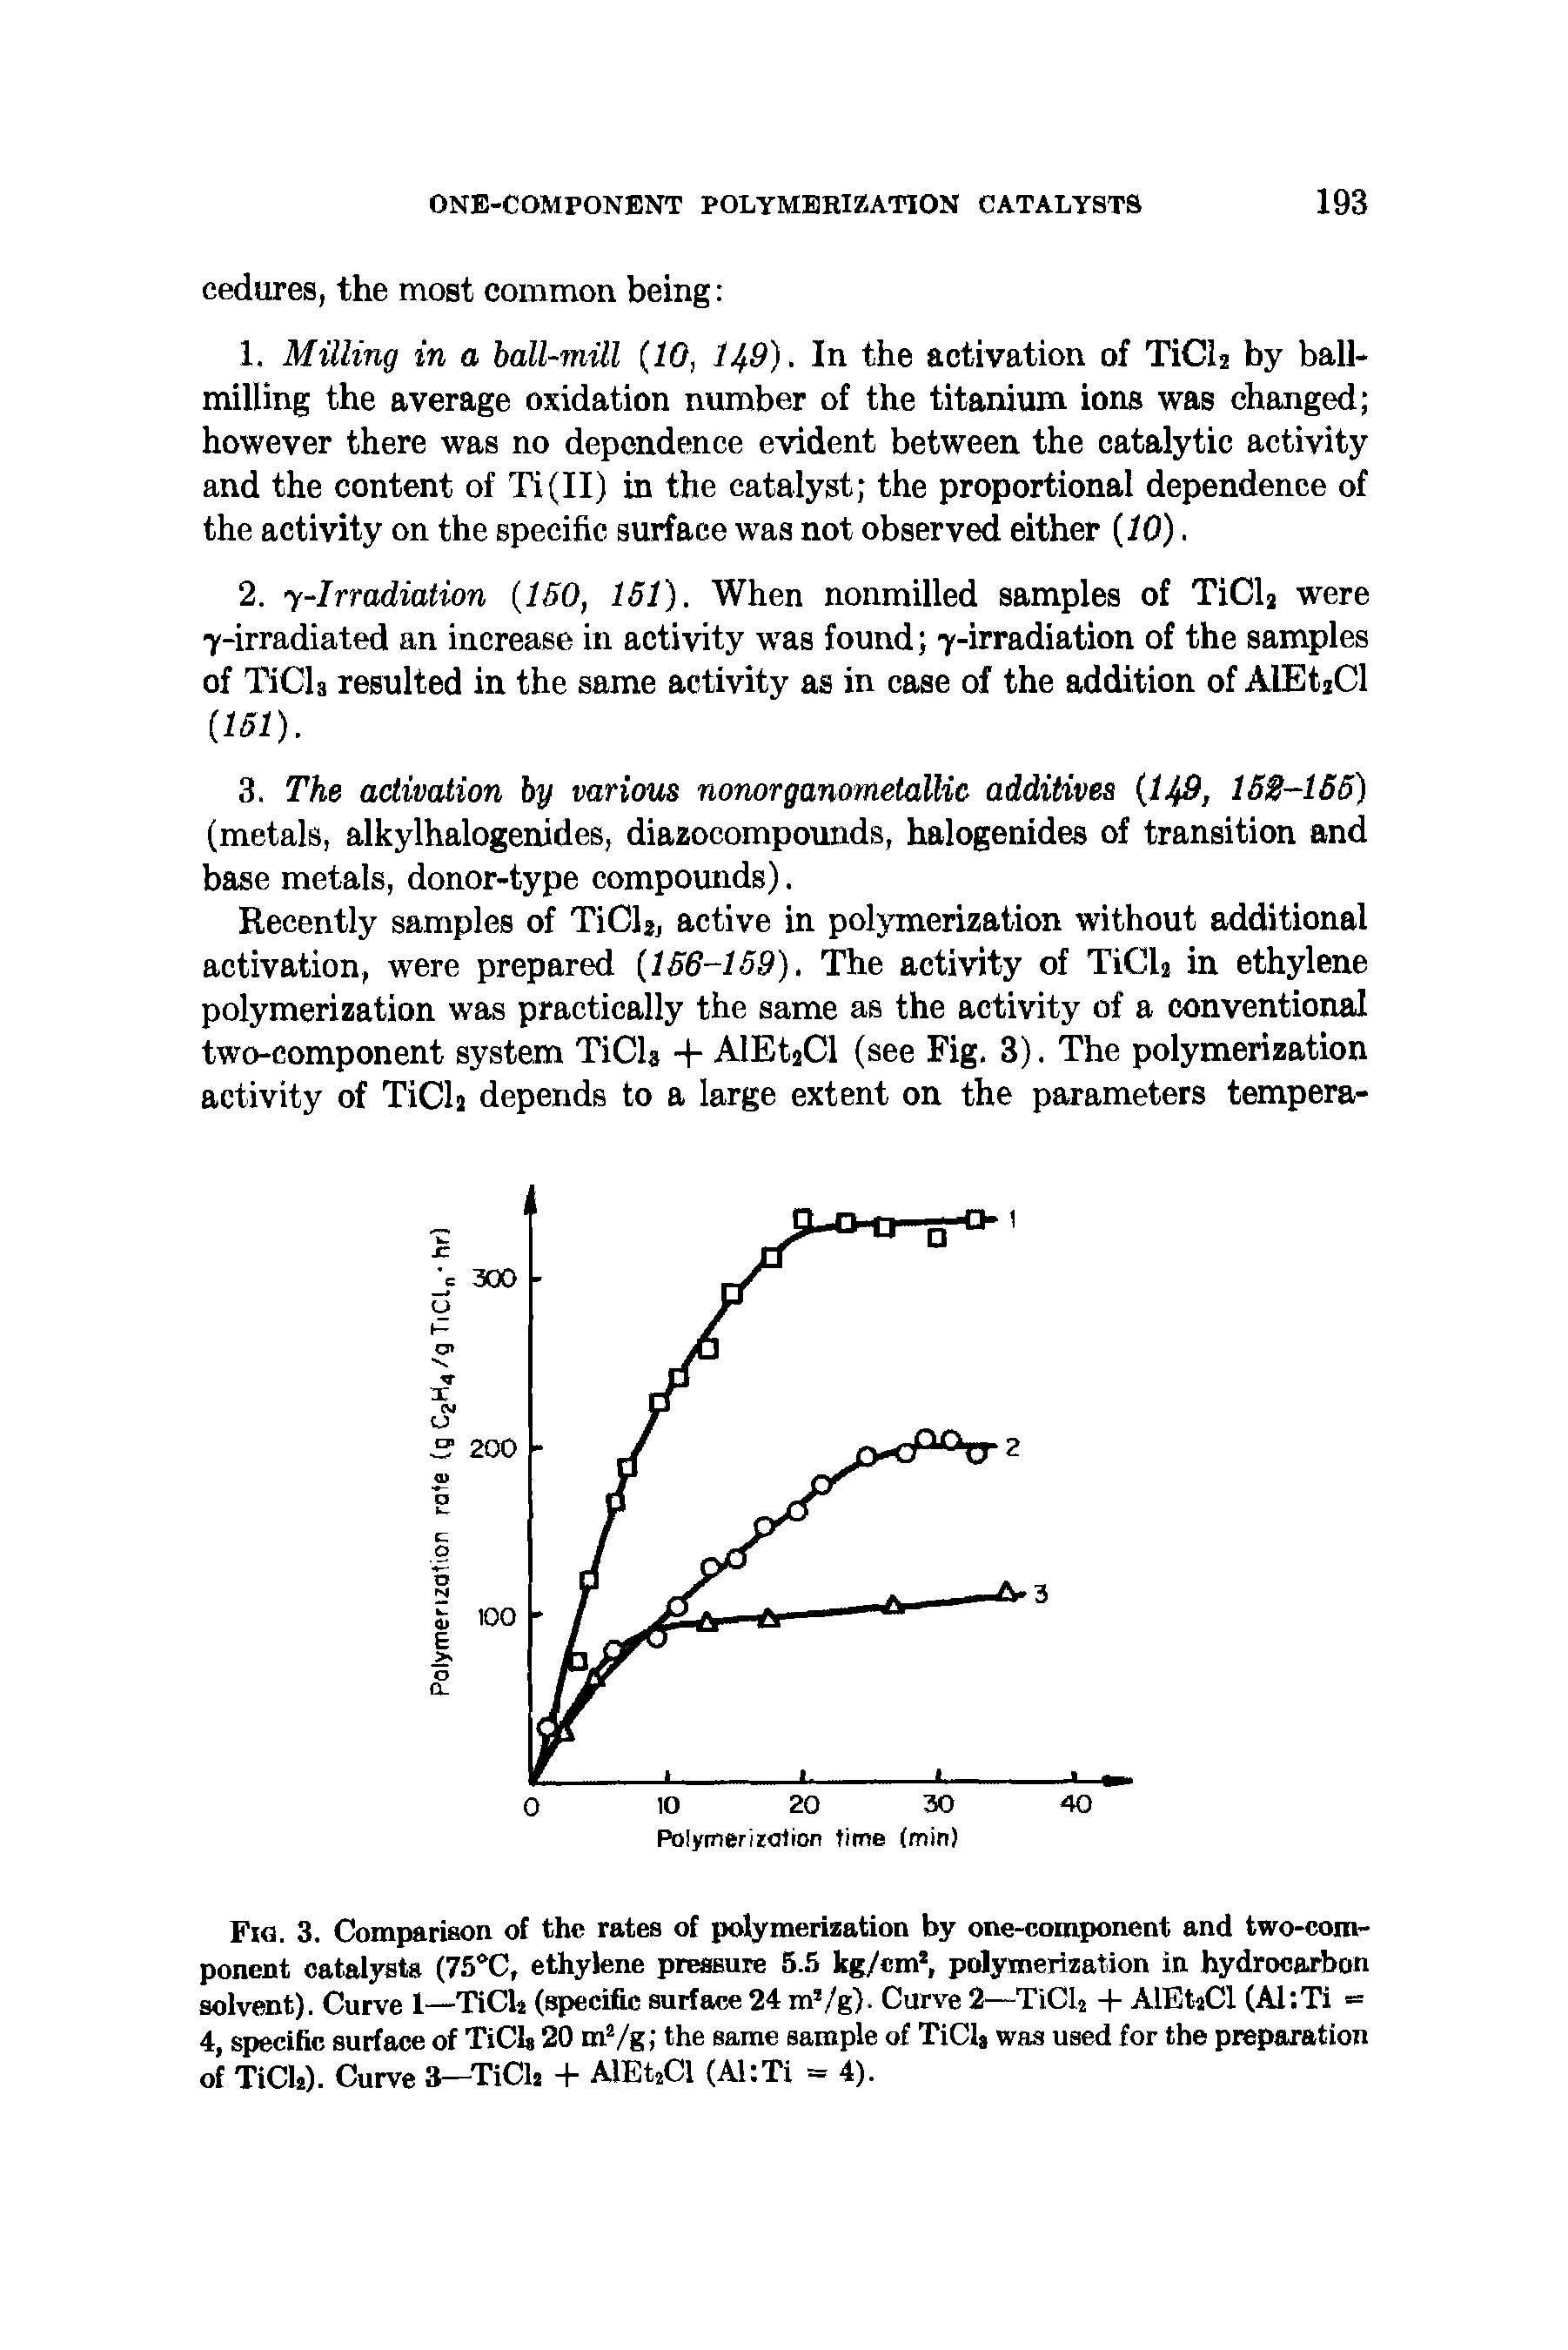 Fig. 3. Comparison of the rates of polymerization by one-component and two-component catalysts (75°C, ethylene pressure 5.5 kg/cm2, polymerization in hydrocarbon solvent). Curve 1—TiCh (specific surface 24 m /g). Curve 2—TiCfi + AlEtjCl (Al Ti = 4, specific surface of TiClj 20 m2/g the same sample of TiClj was used for the preparation of TiCls). Curve 3—TiCfi + AlEtjCl (Al Ti = 4).